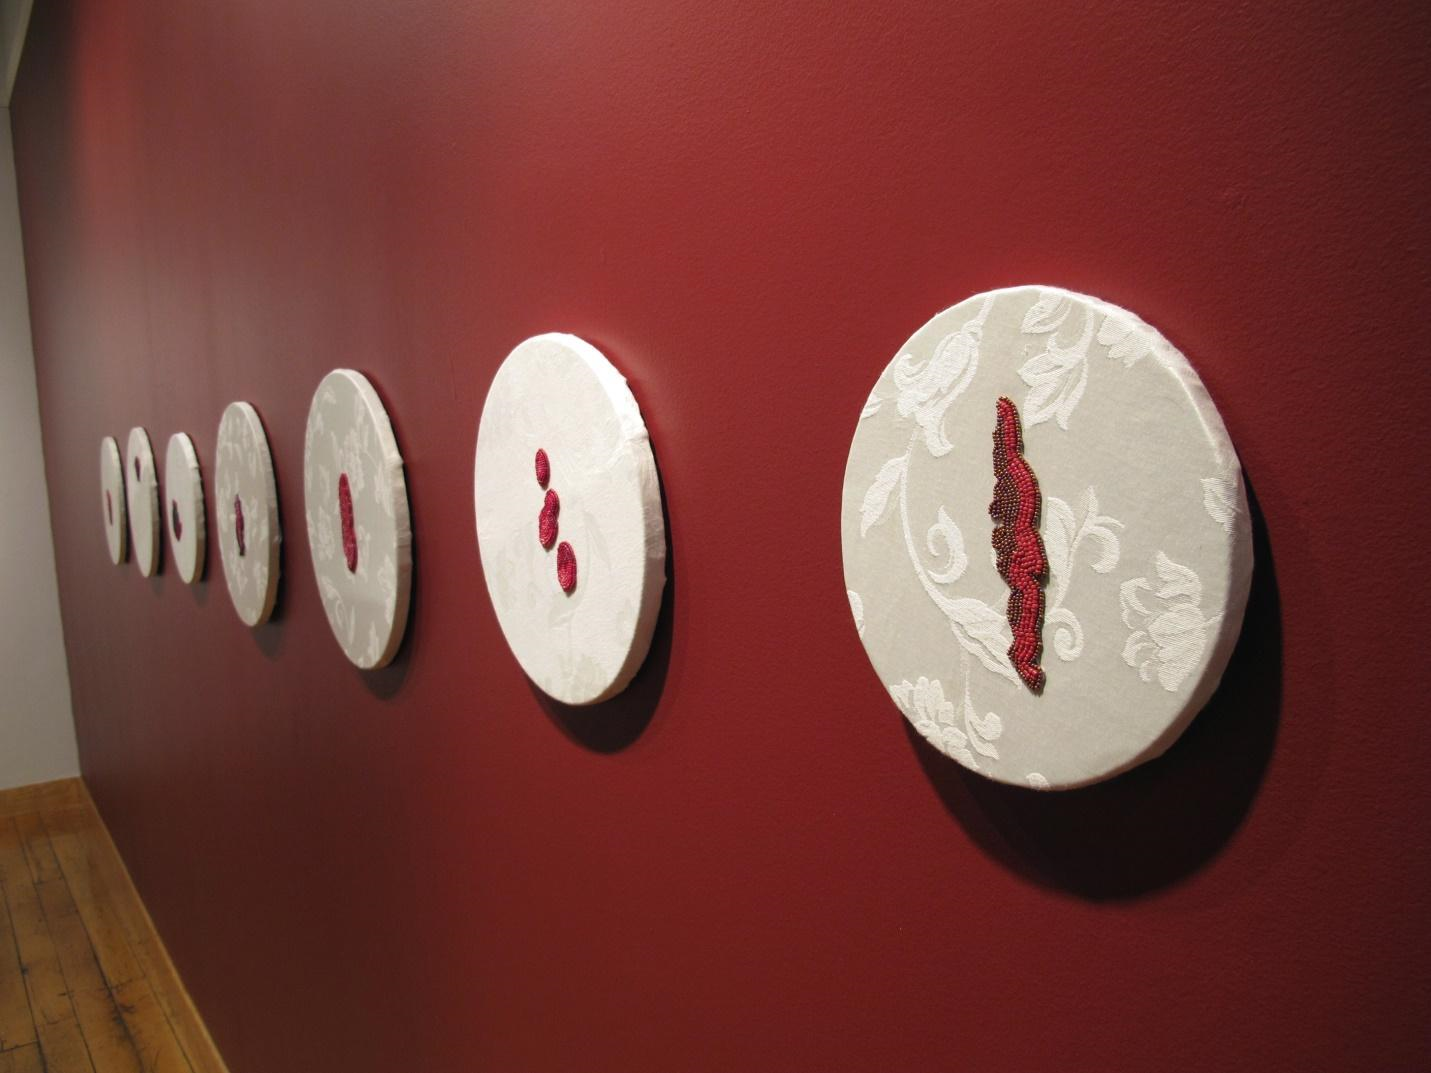 This photograph features “Marked II”, a series of seven beading works,
        they are twelve inch diameter embroideries by Vanessa Dion Fletcher hung
        on a dark red wall in the Tangled Art Gallery as part of her exhibition, <em>Own Your Cervix</em>.
        The circular embroideries are arranged horizontally across the wall. The
        embroidery closest to the camera is more in focus displays a circular frame
        stretched with white damask fabric with a beaded shape similar to a blood
        stain in the centre. Each embroidery work in the series shows different
        shapes of the artists’ period stains embroidered with red beads.